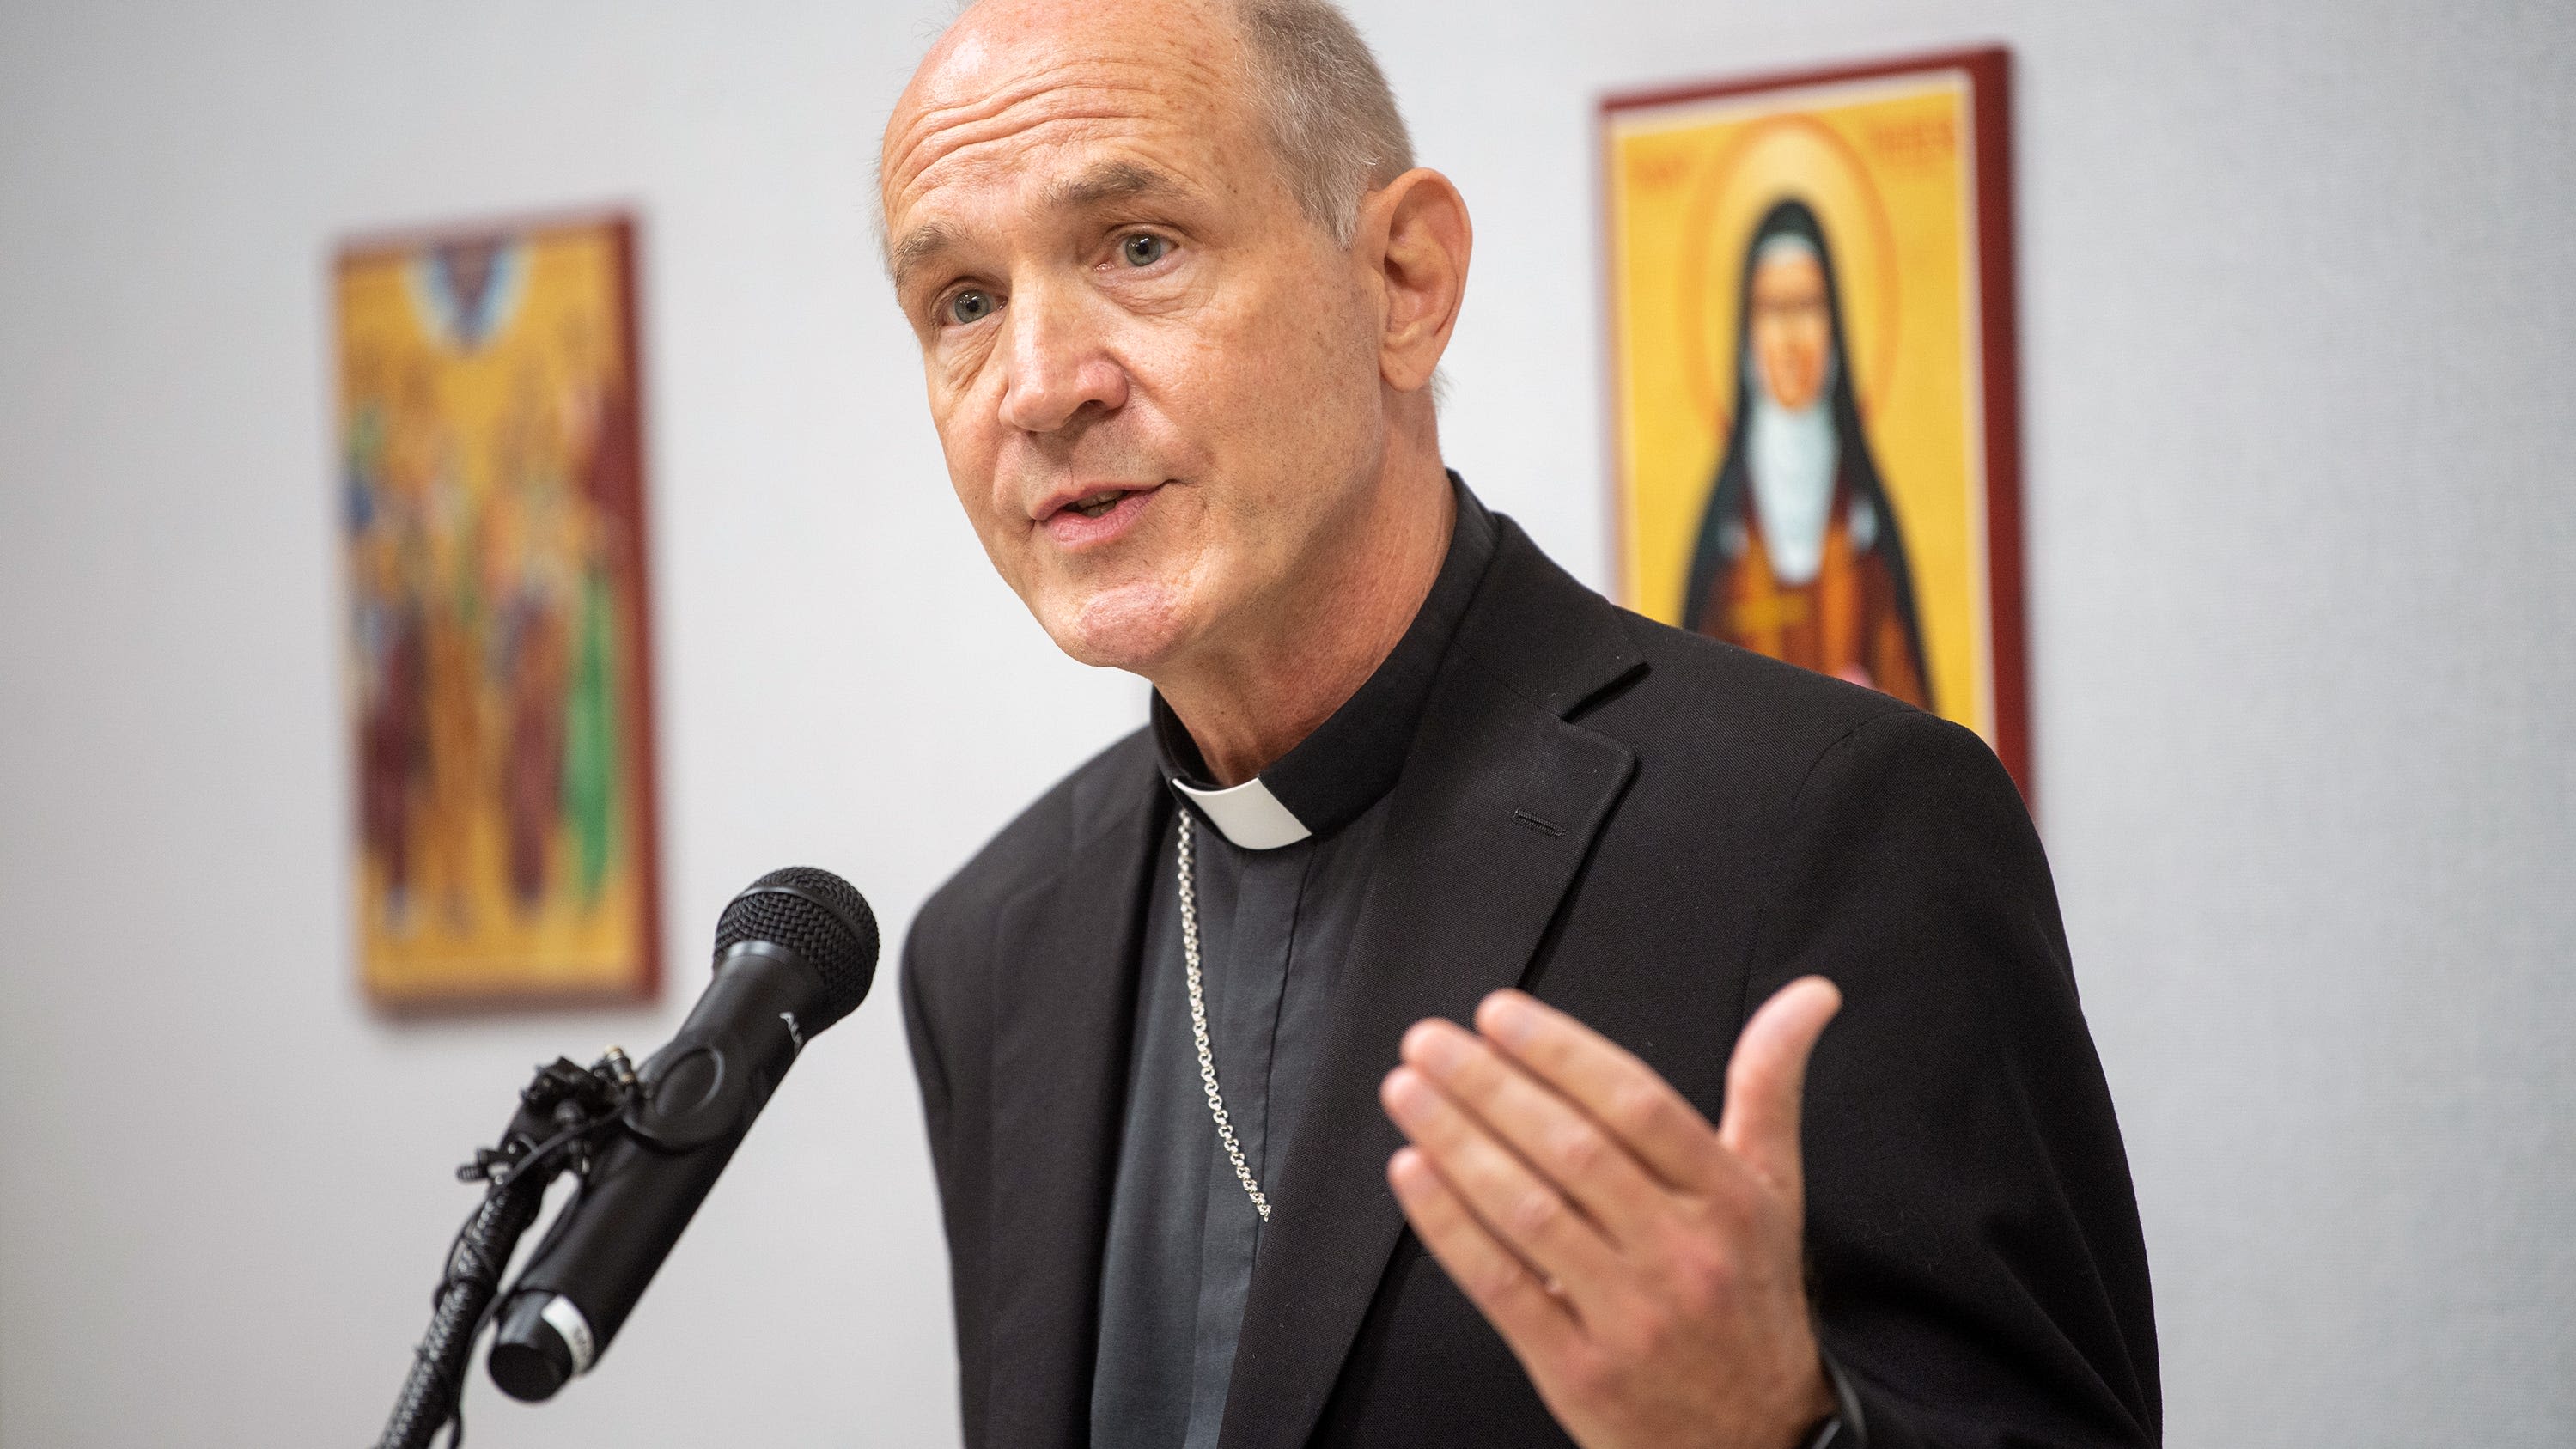 Tennessee native will be the new bishop for Diocese of Knoxville. His focus is on healing.